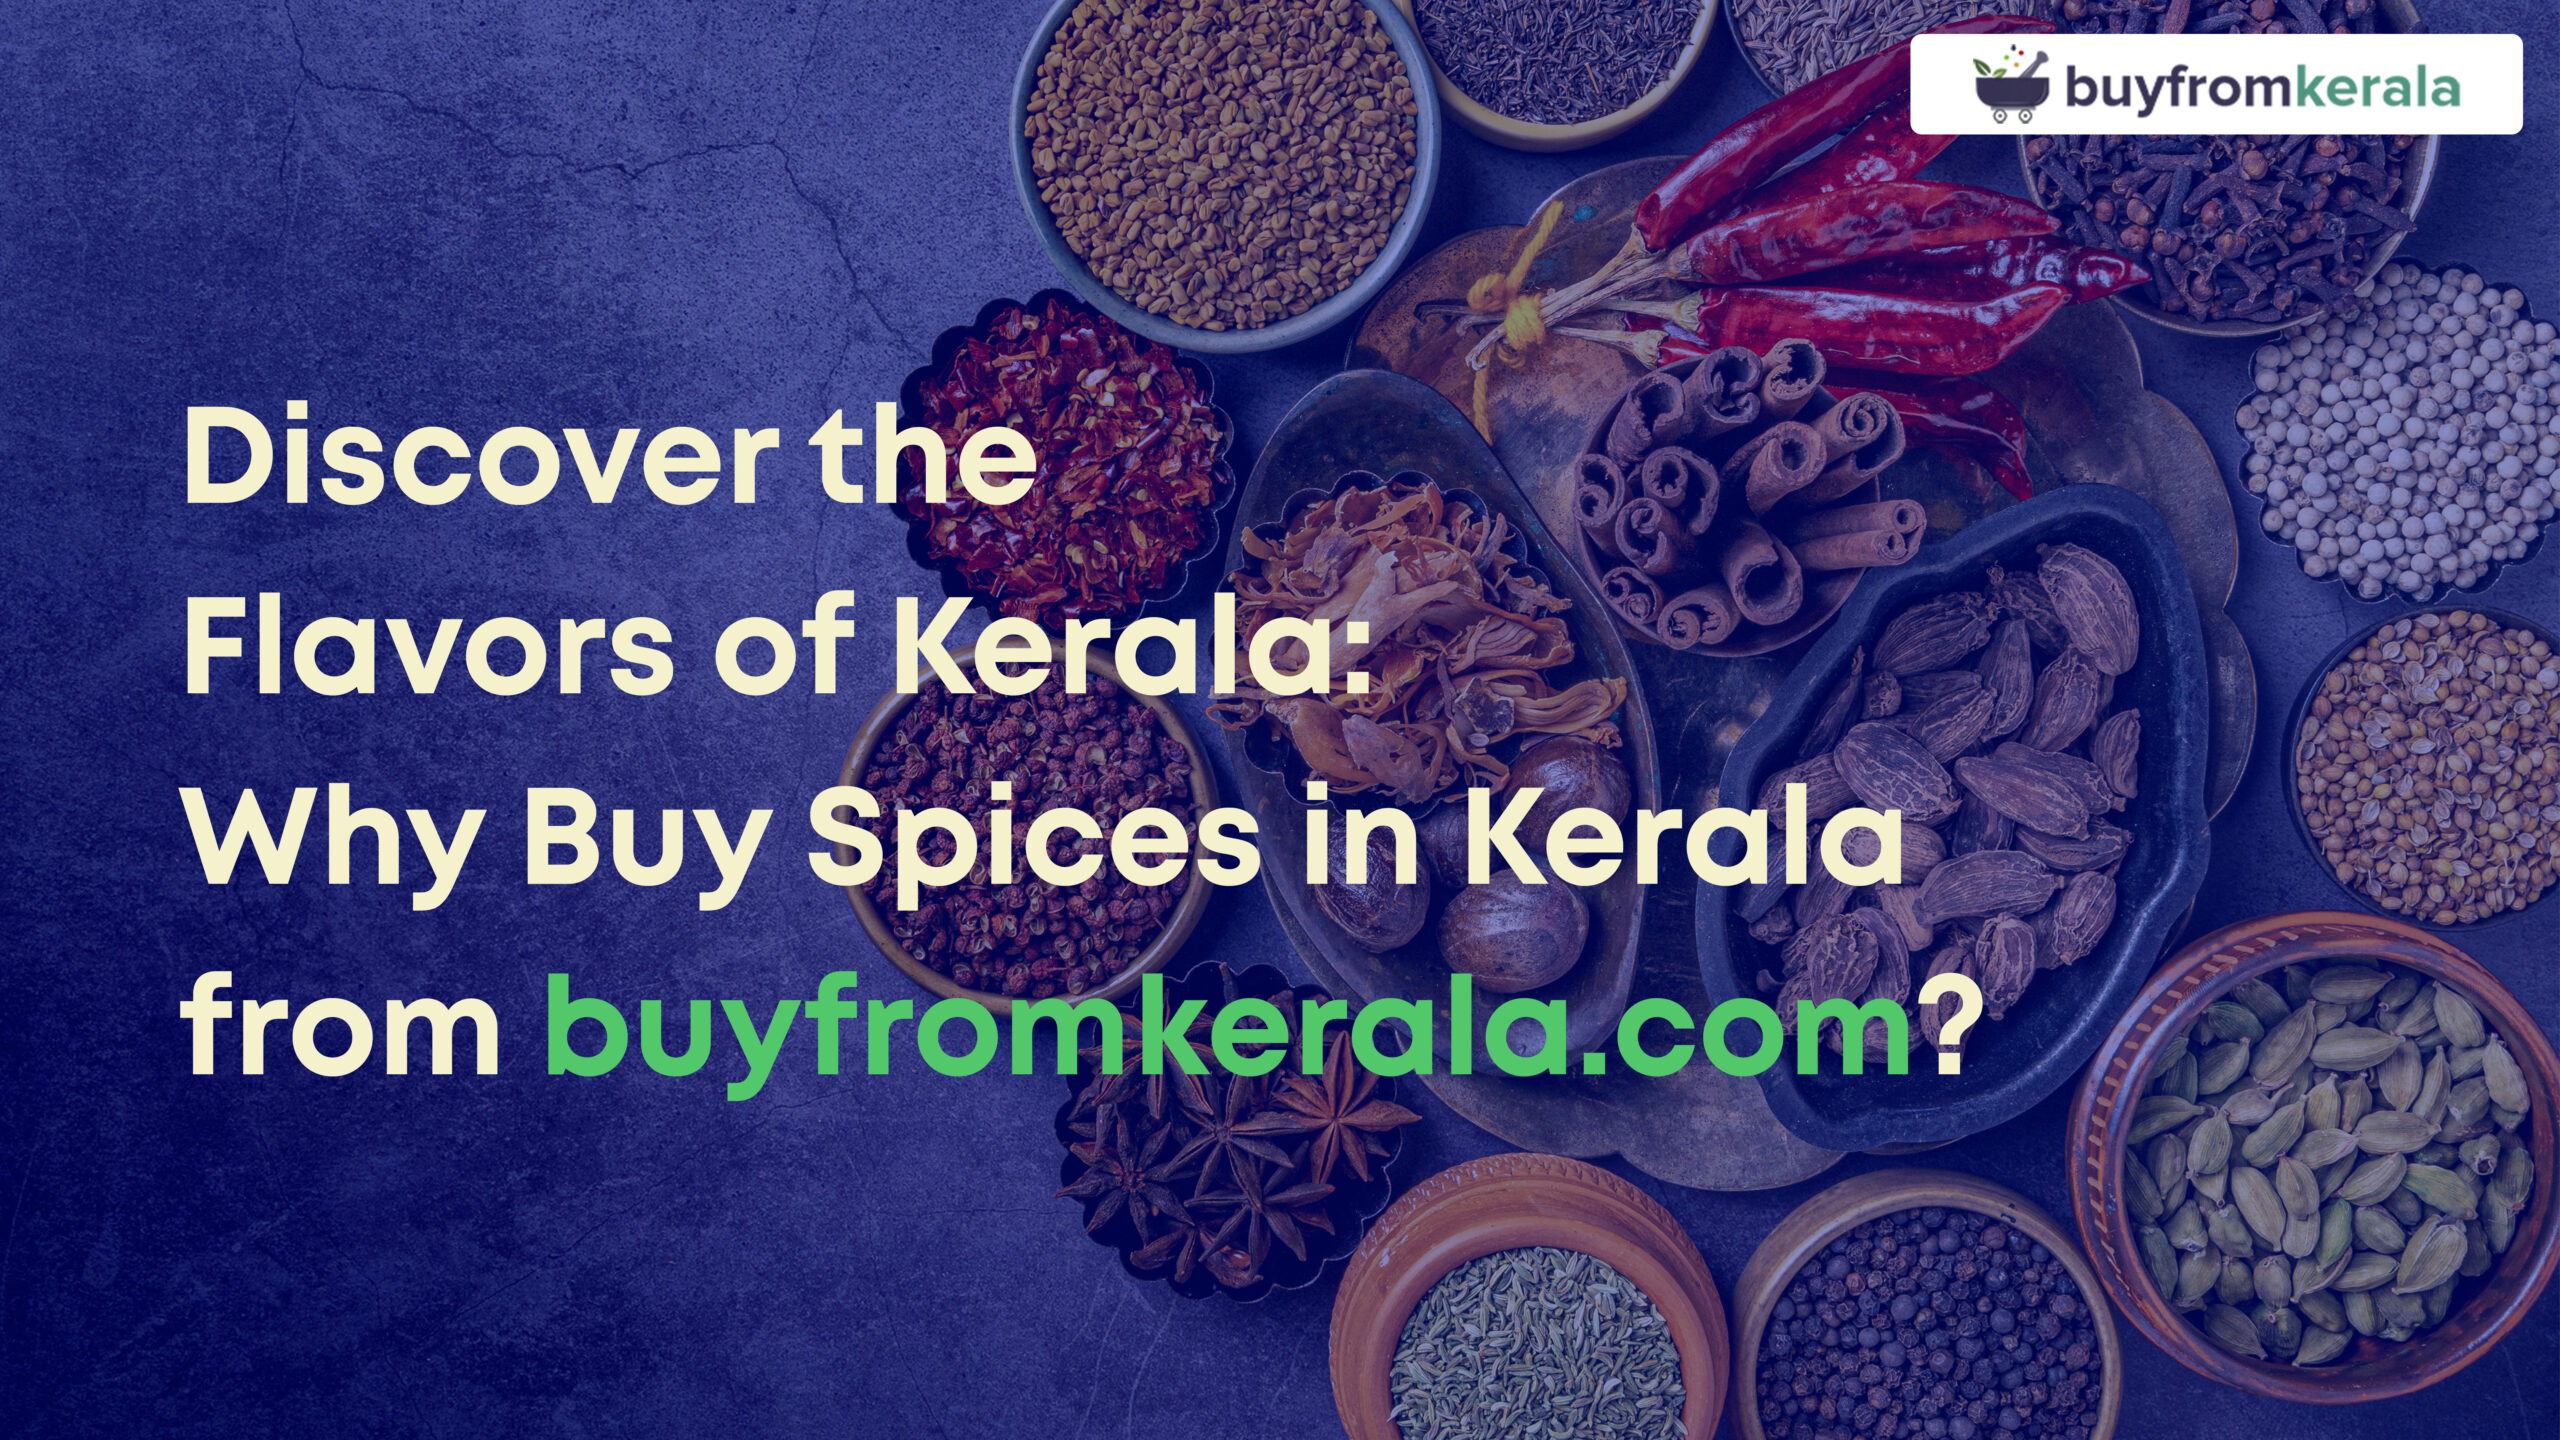 Discover the Flavors of Kerala: Why Buy Spices in Kerala from BuyFromKerala.com?